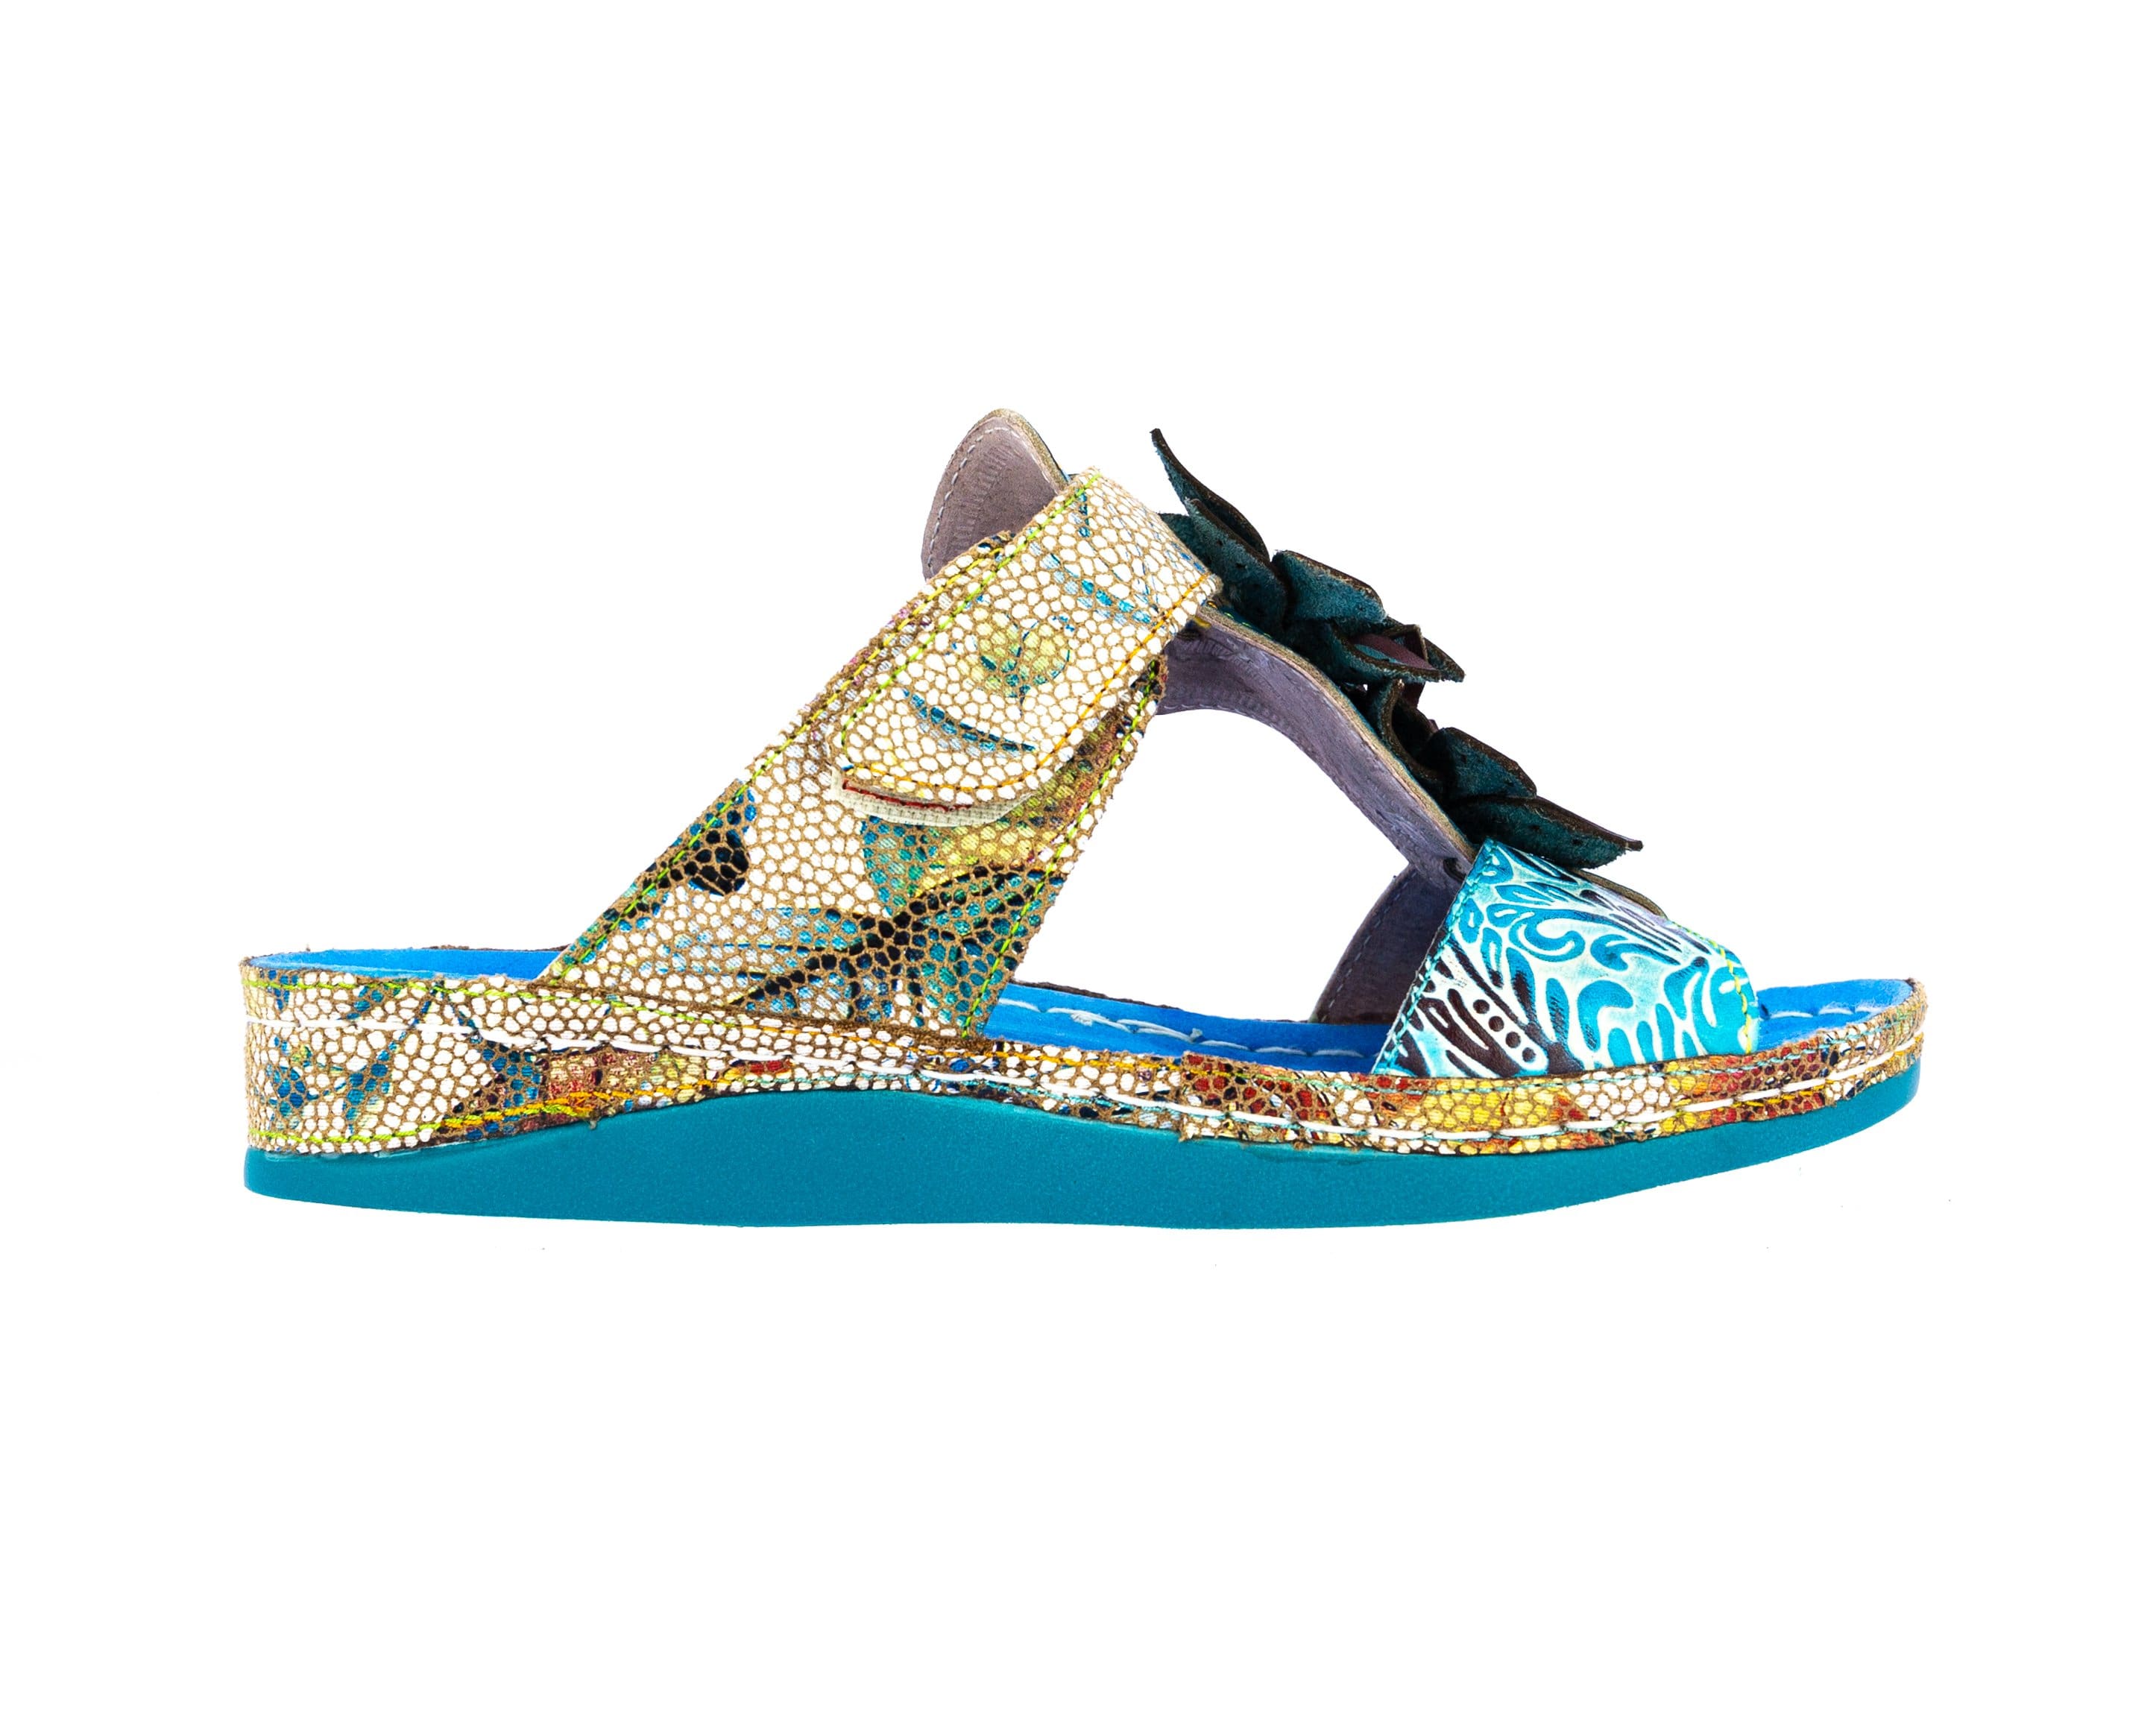 Chaussures BRCUELO 83 - 35 / TURQUOISE - Mulle